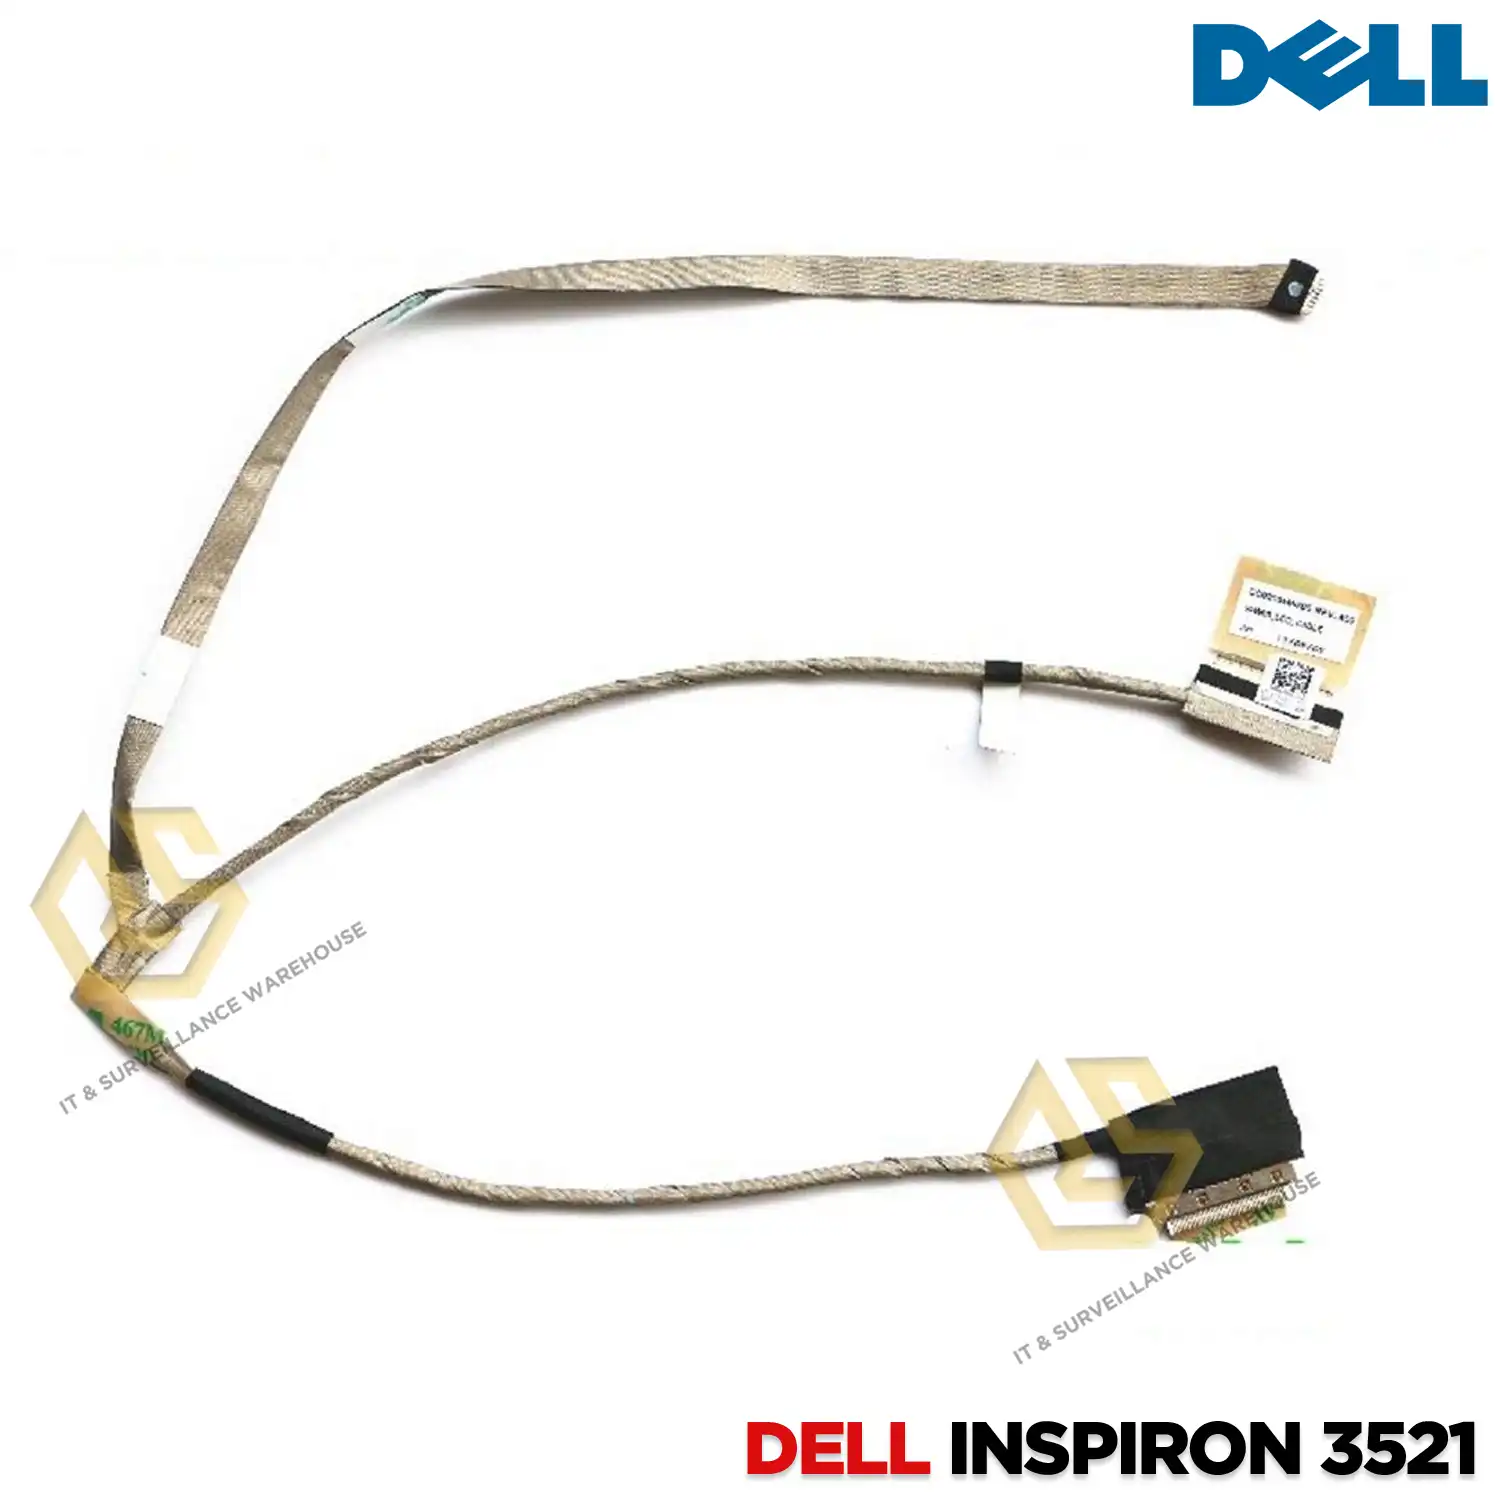 LAPTOP DISPLAY CABLE FOR DELL INSPIRON 3521 | 3537 | 3737 | 15R | 5737